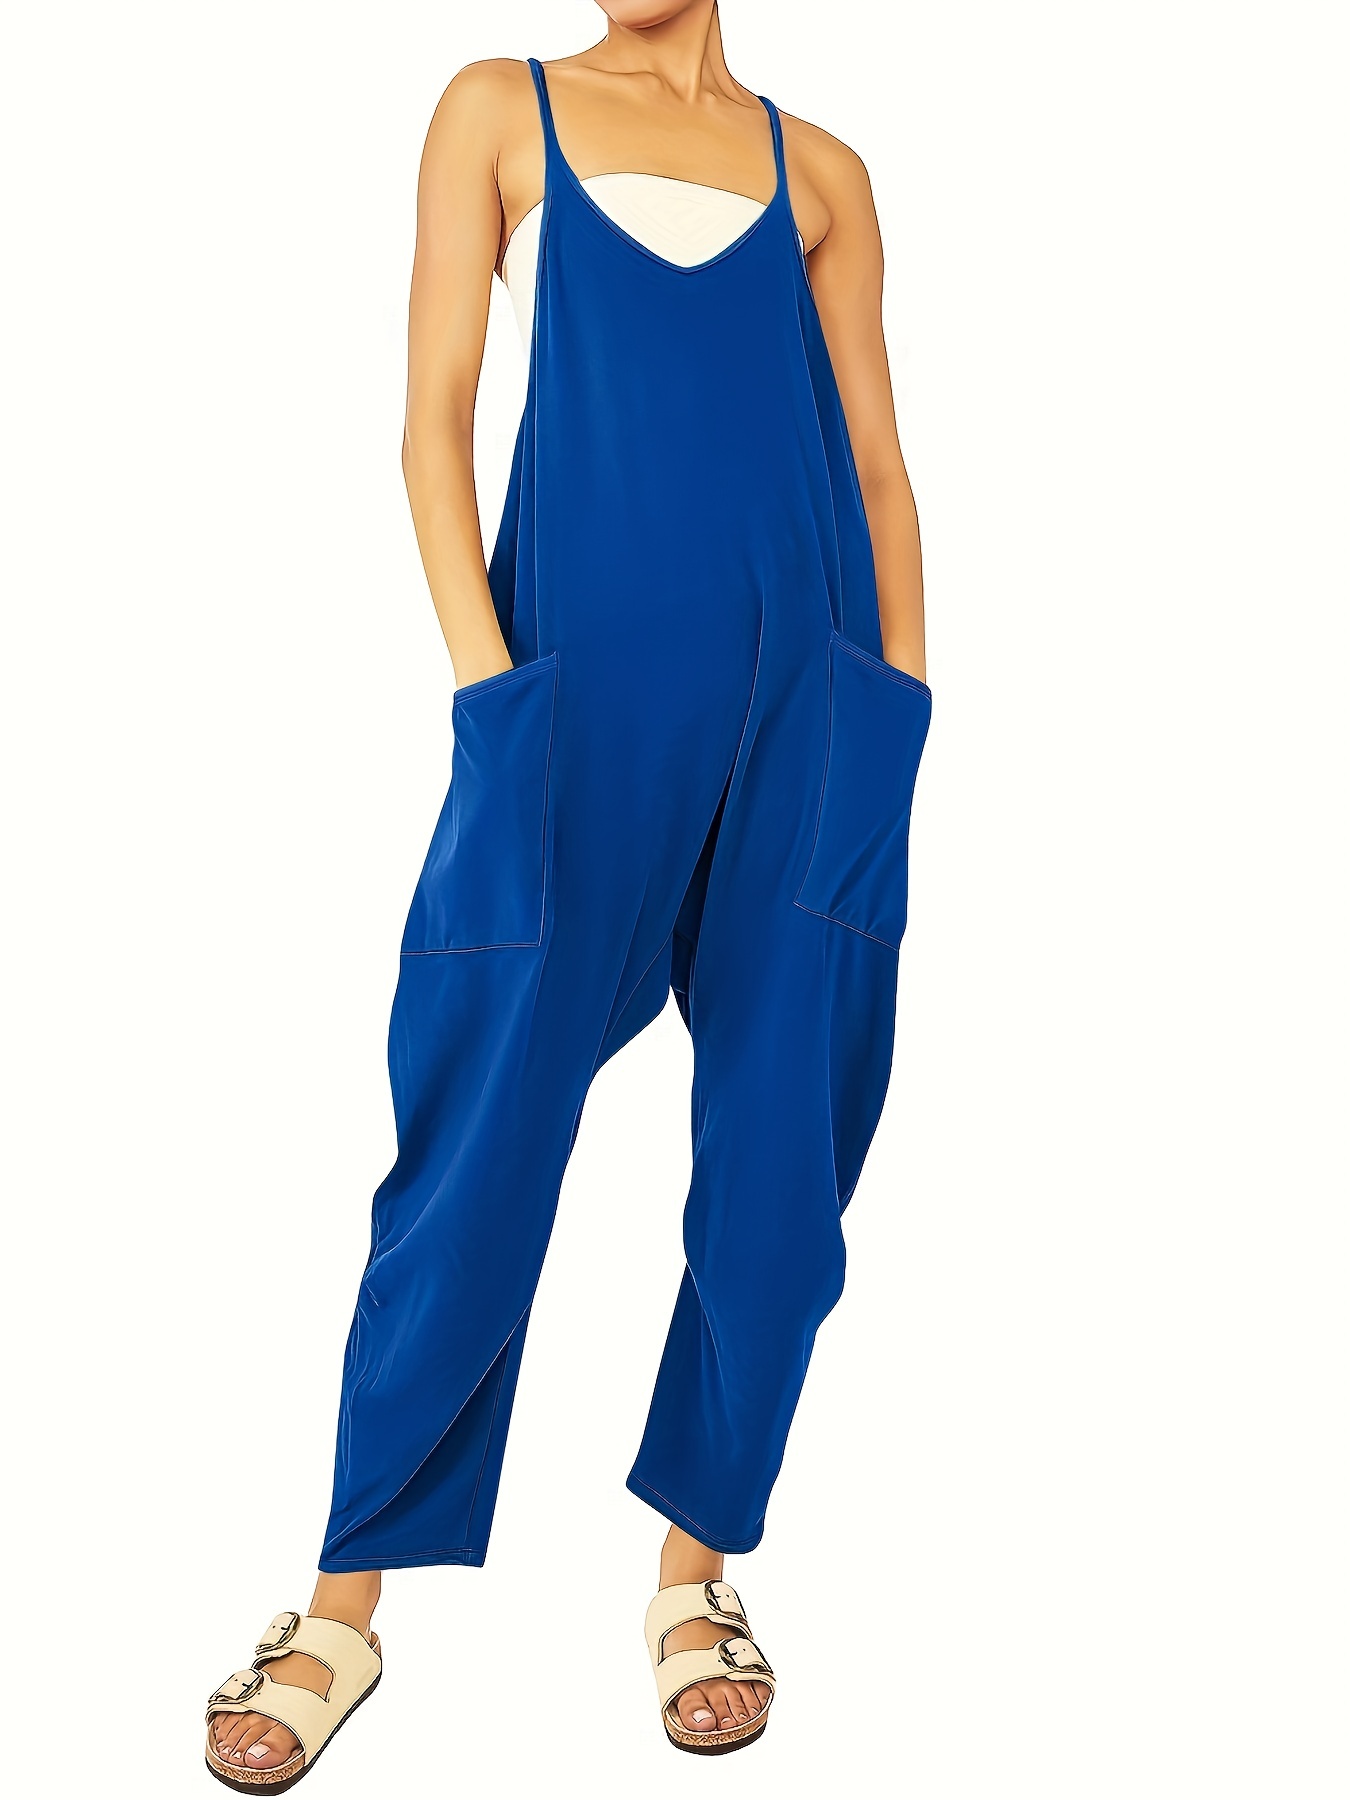  Kcocoo Womens Casual Jumpsuits Summer Rompers